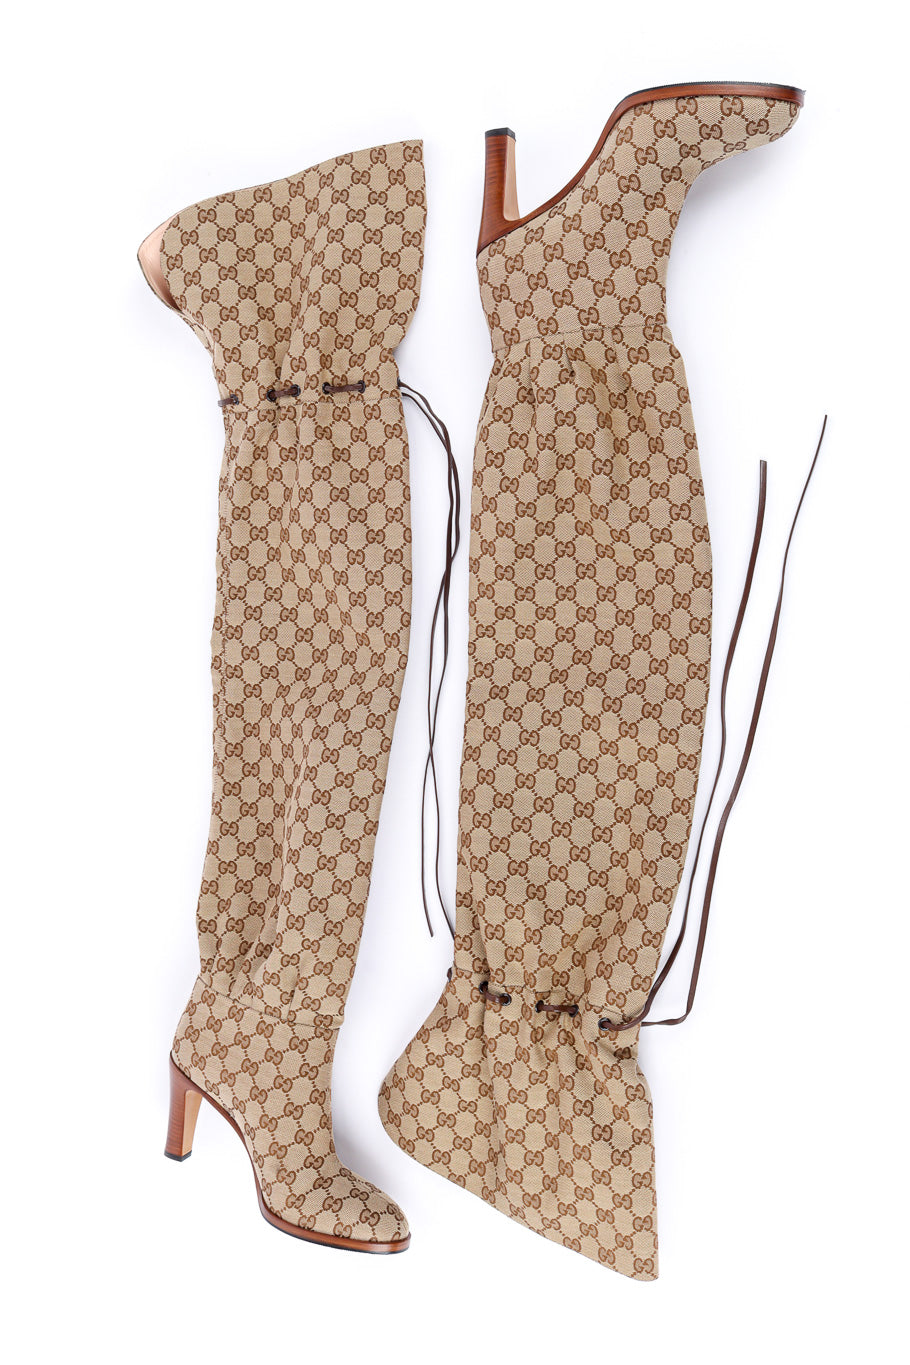 Gucci NEW Monogram Canvas Brown Leather Tie Logo Tall Thigh High Boots in  Box